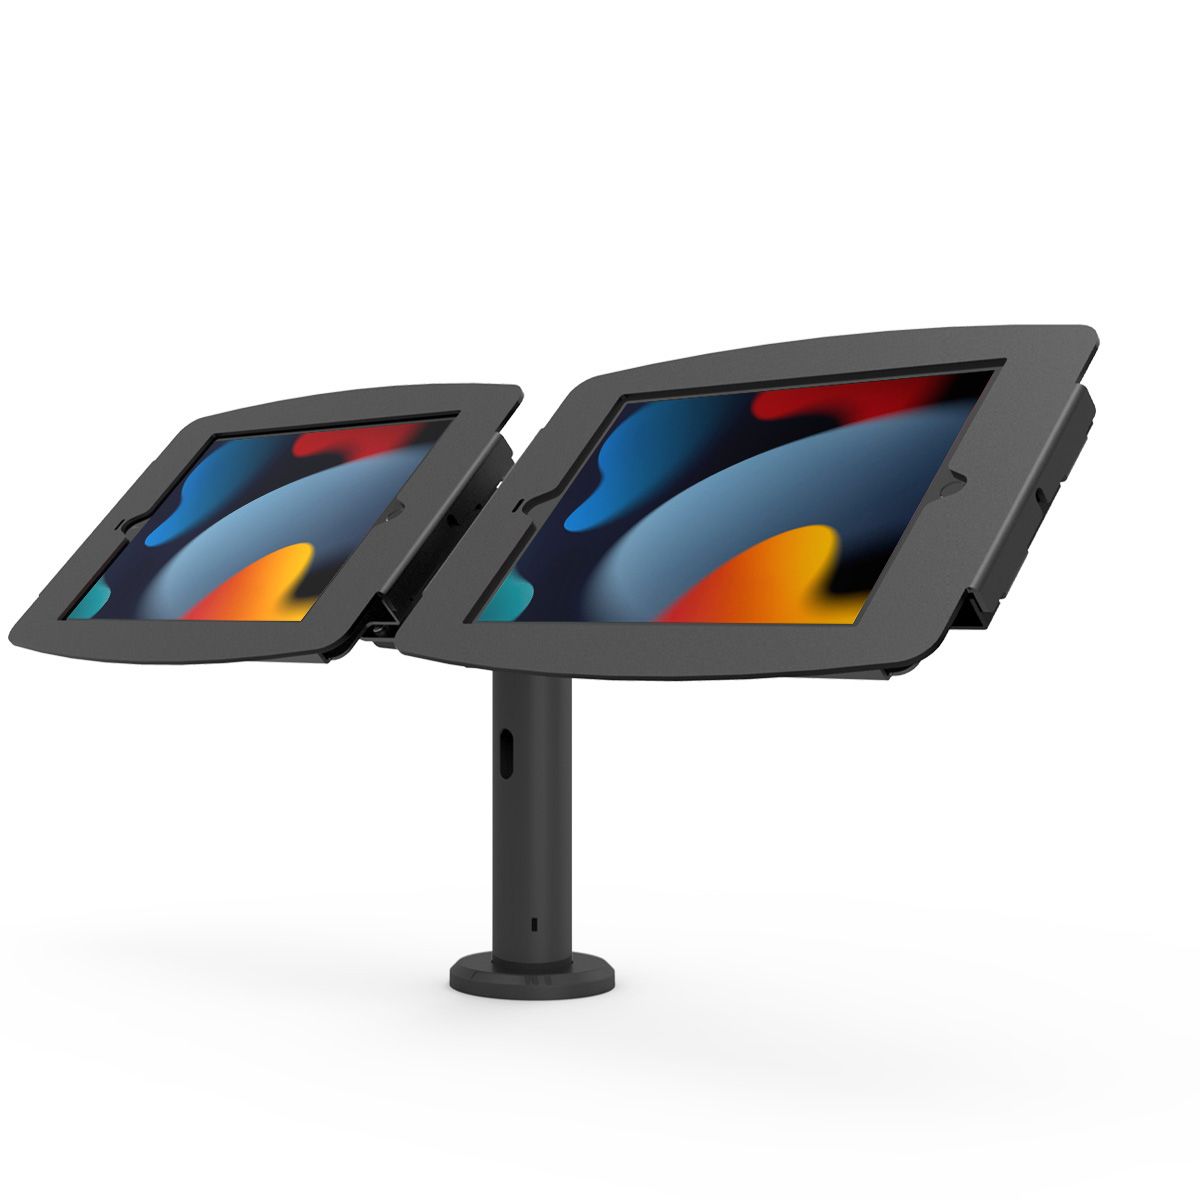 Tabletop tablet holder - THE RISE SPACE DUAL - Maclocks / Compulocks -  commercial / horizontal / secure